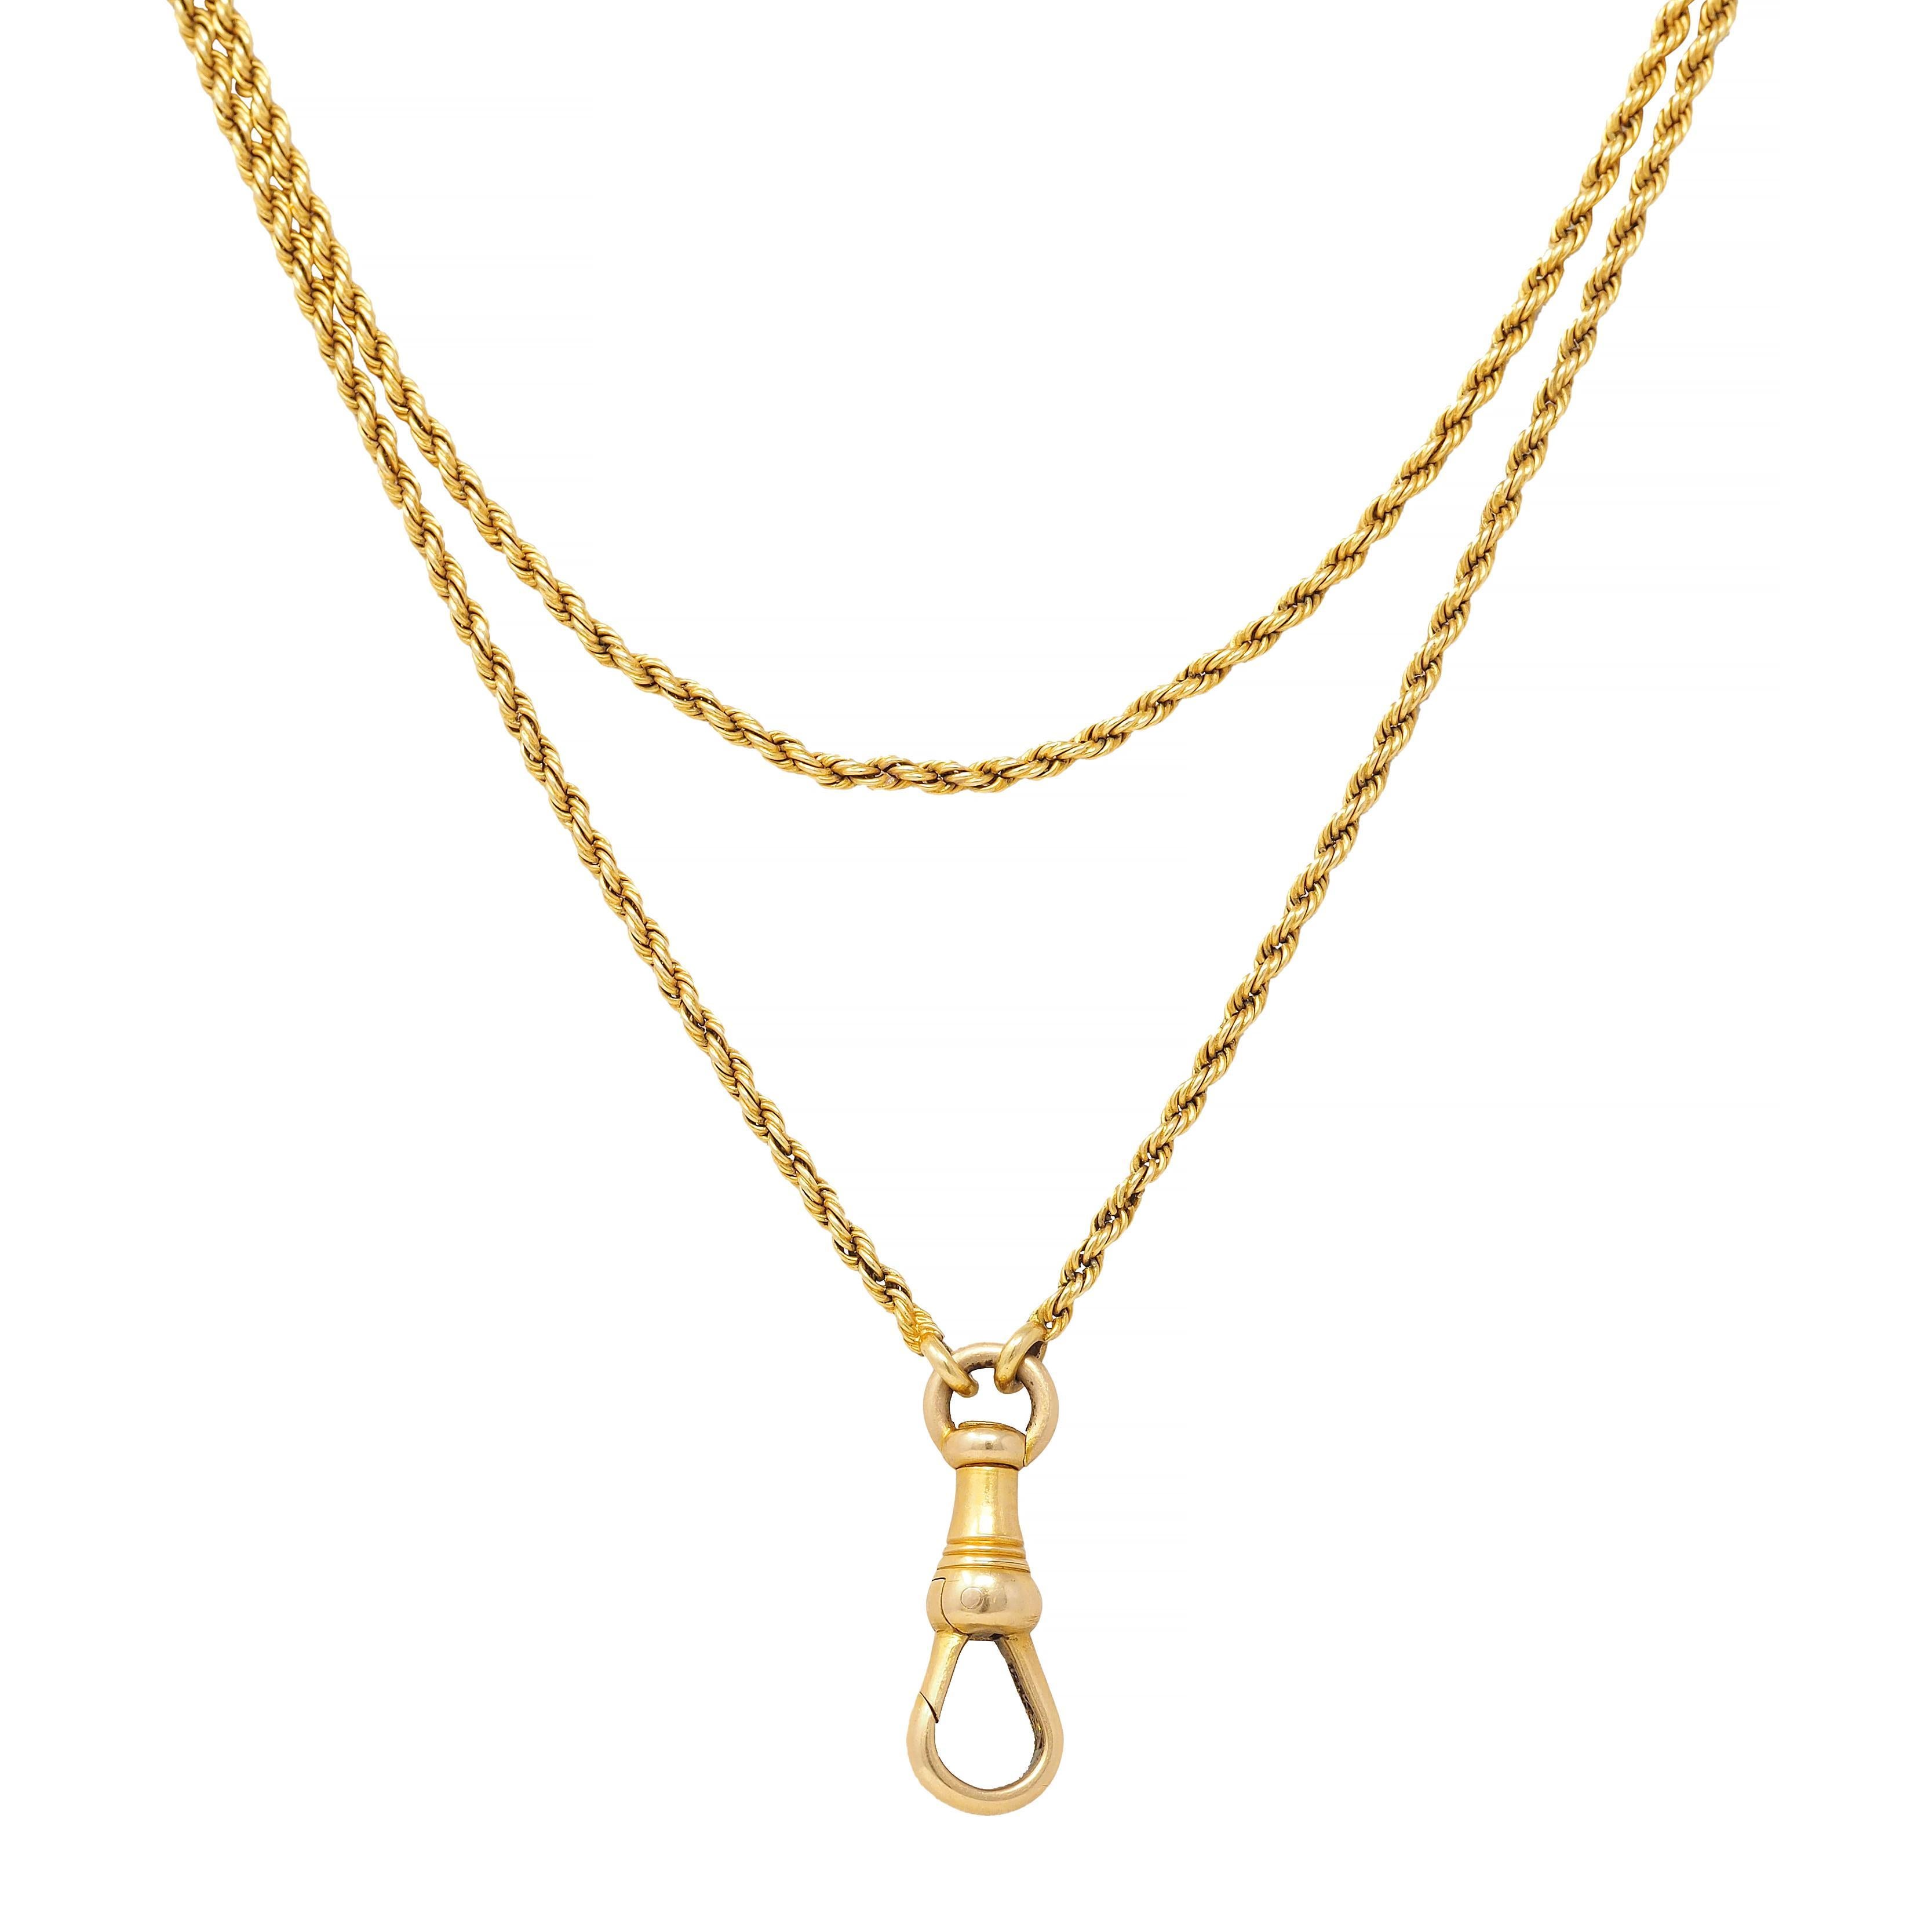 Victorian 14 Karat Yellow Gold Twisted Rope Antique Fob Chain Necklace For Sale 1